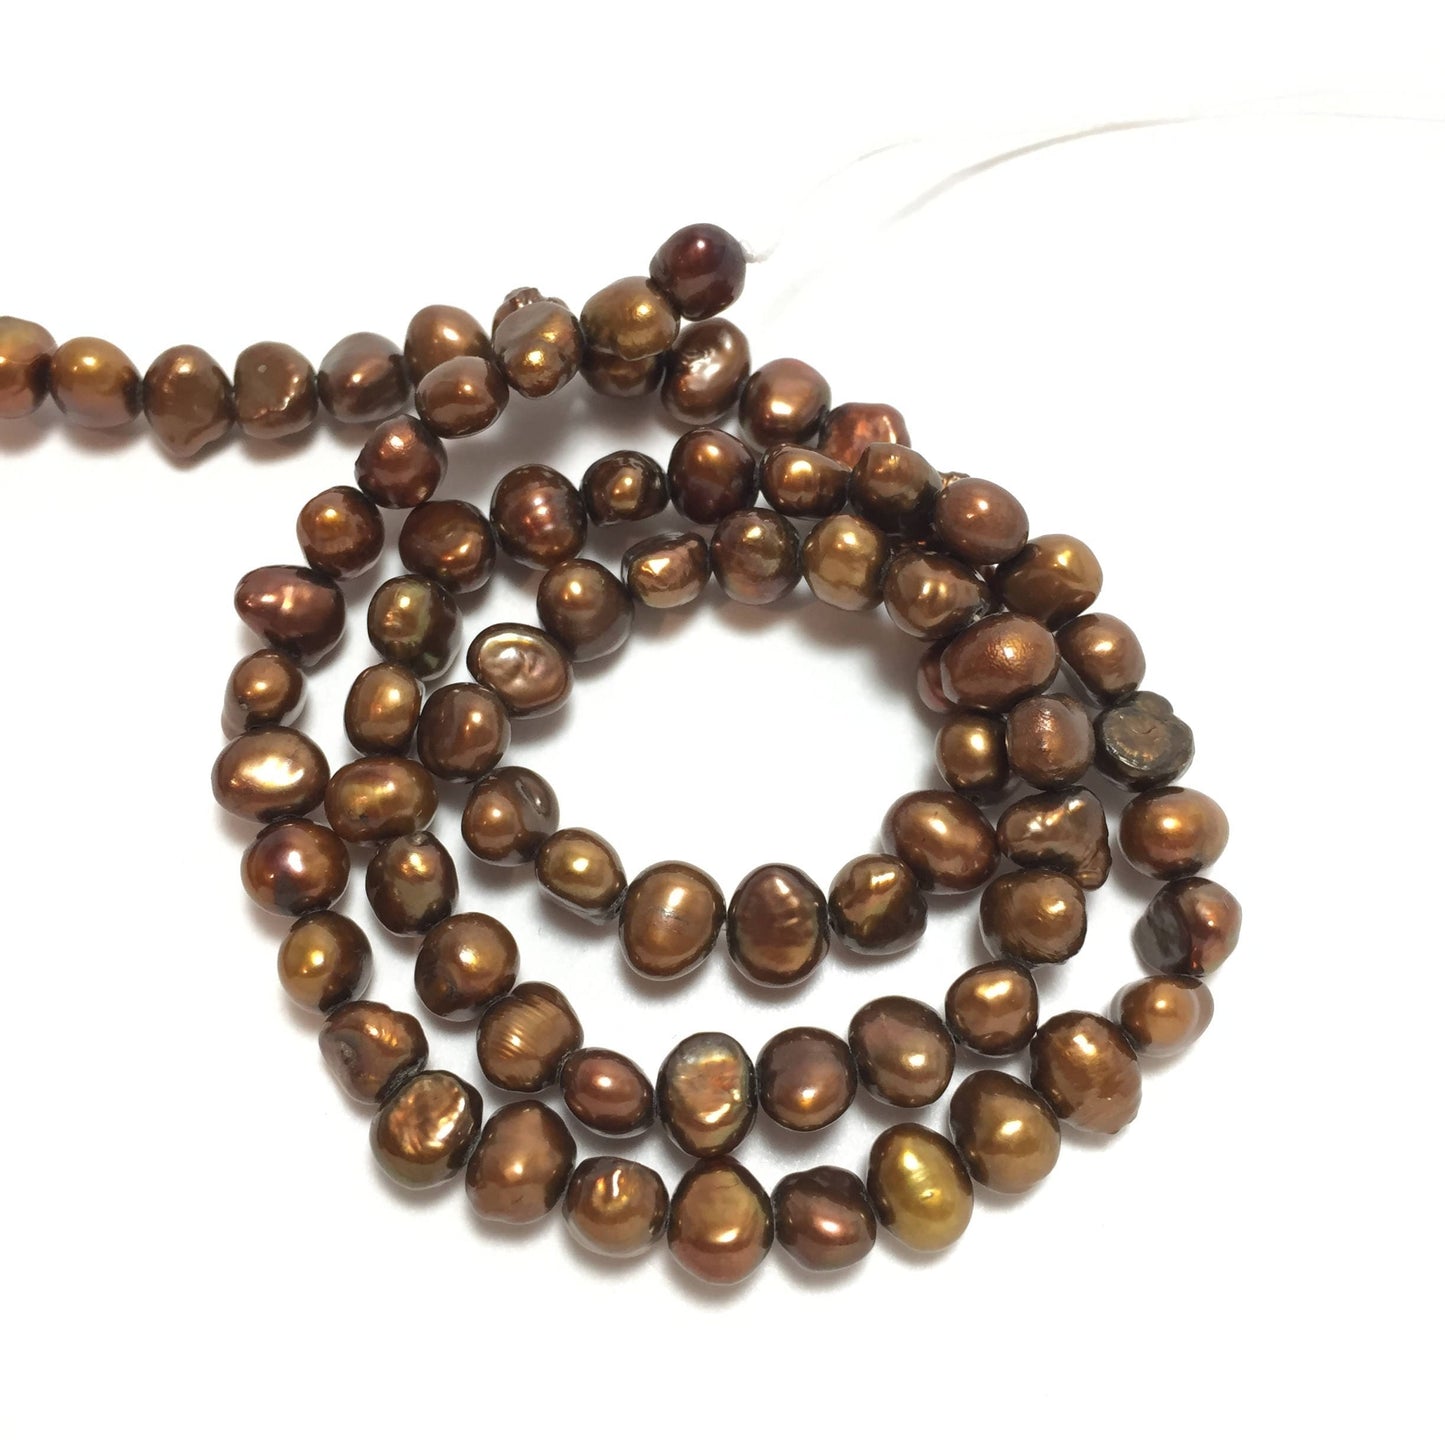 Nugget 5.5-6mm Brown Freshwater Pearls 16 inches, NUG012